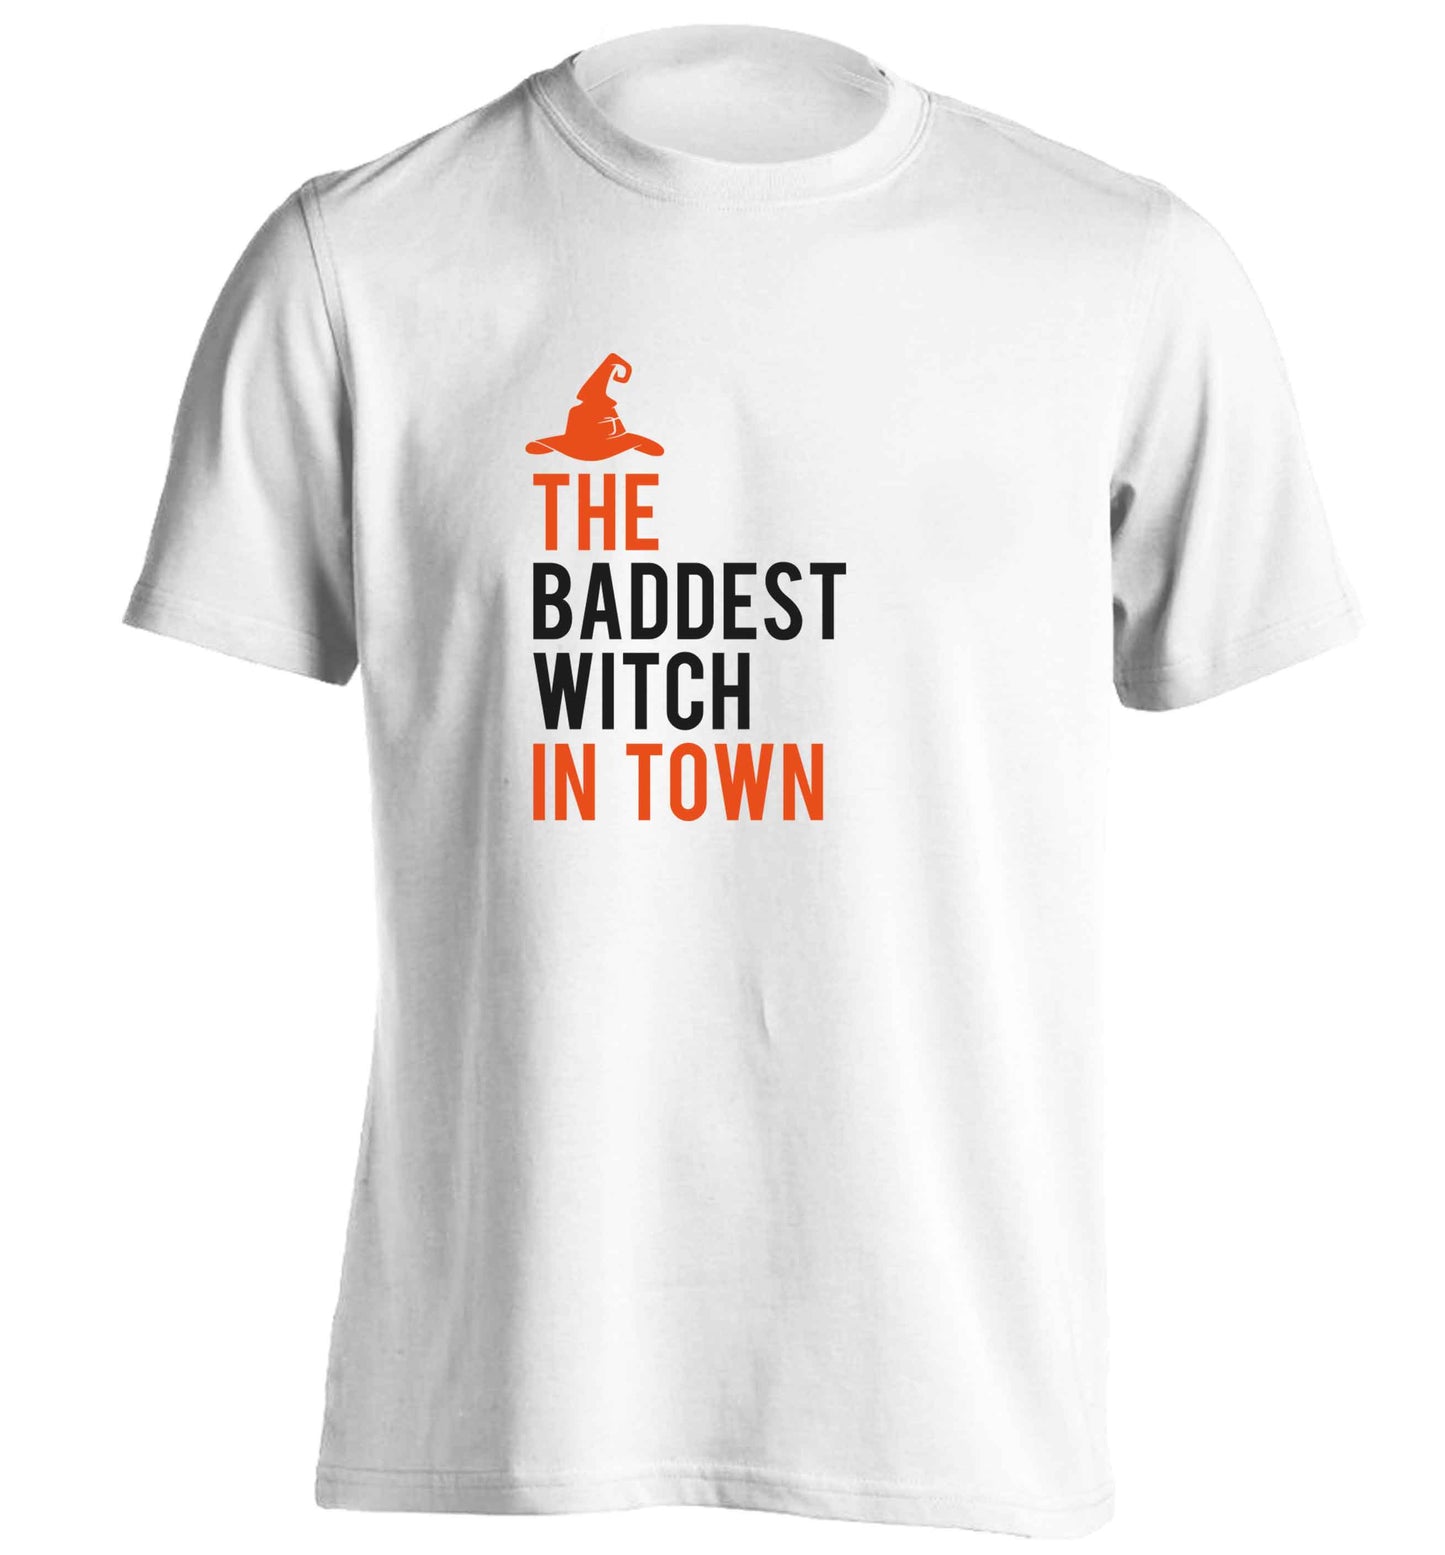 Badest witch in town adults unisex white Tshirt 2XL